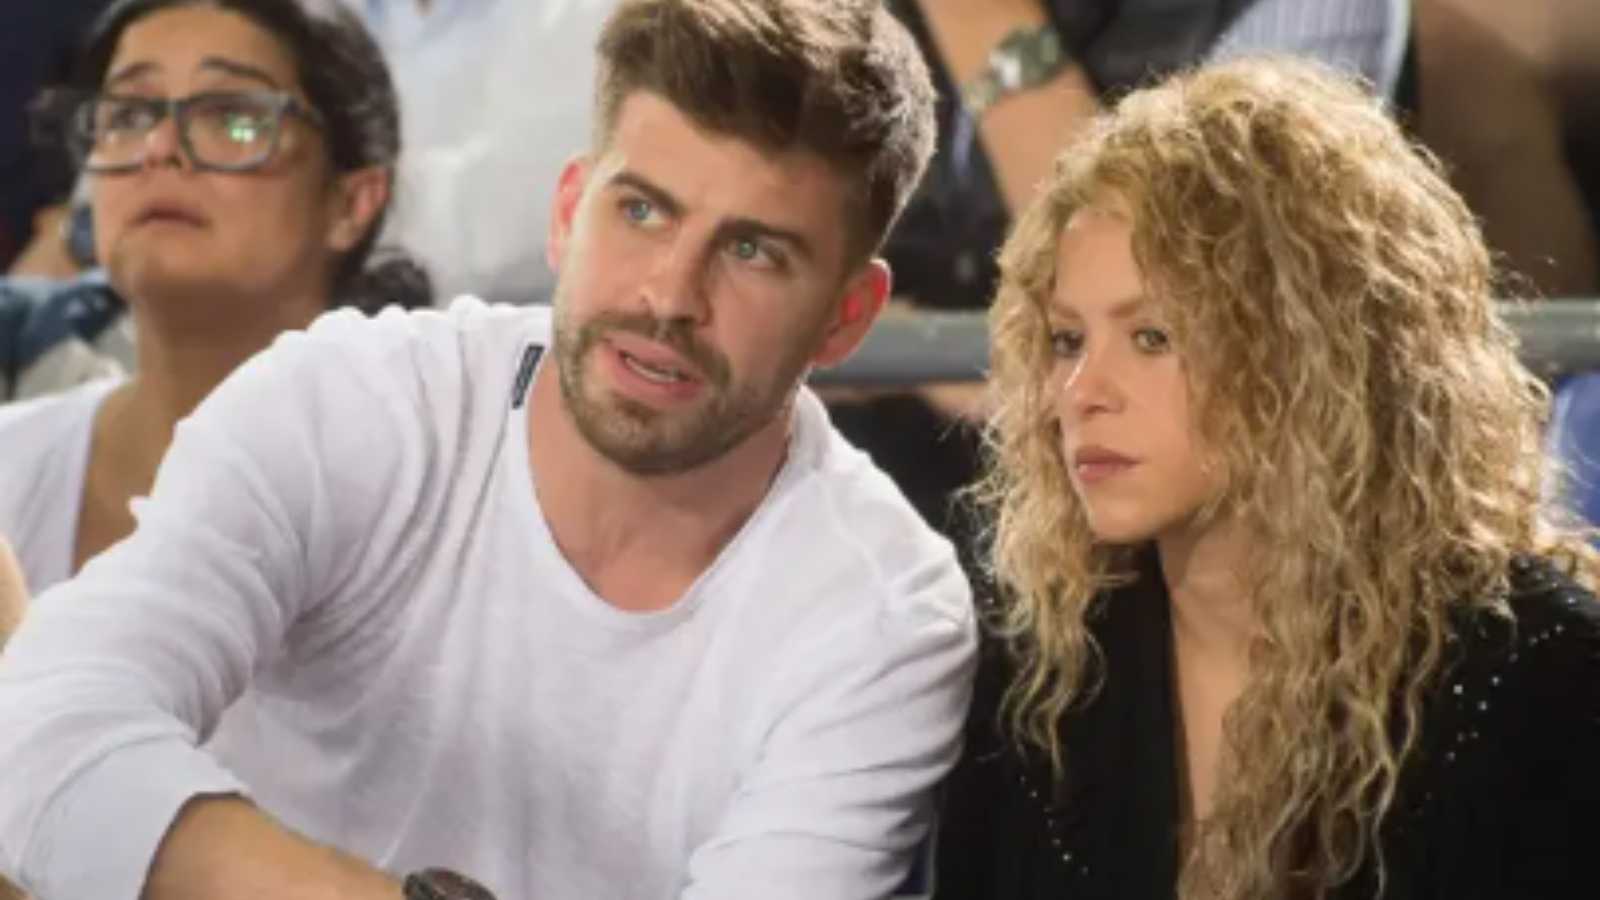 'I was dedicated to him' : Shakira on the tragic end of her relationship with ex-partner Gerard Pique